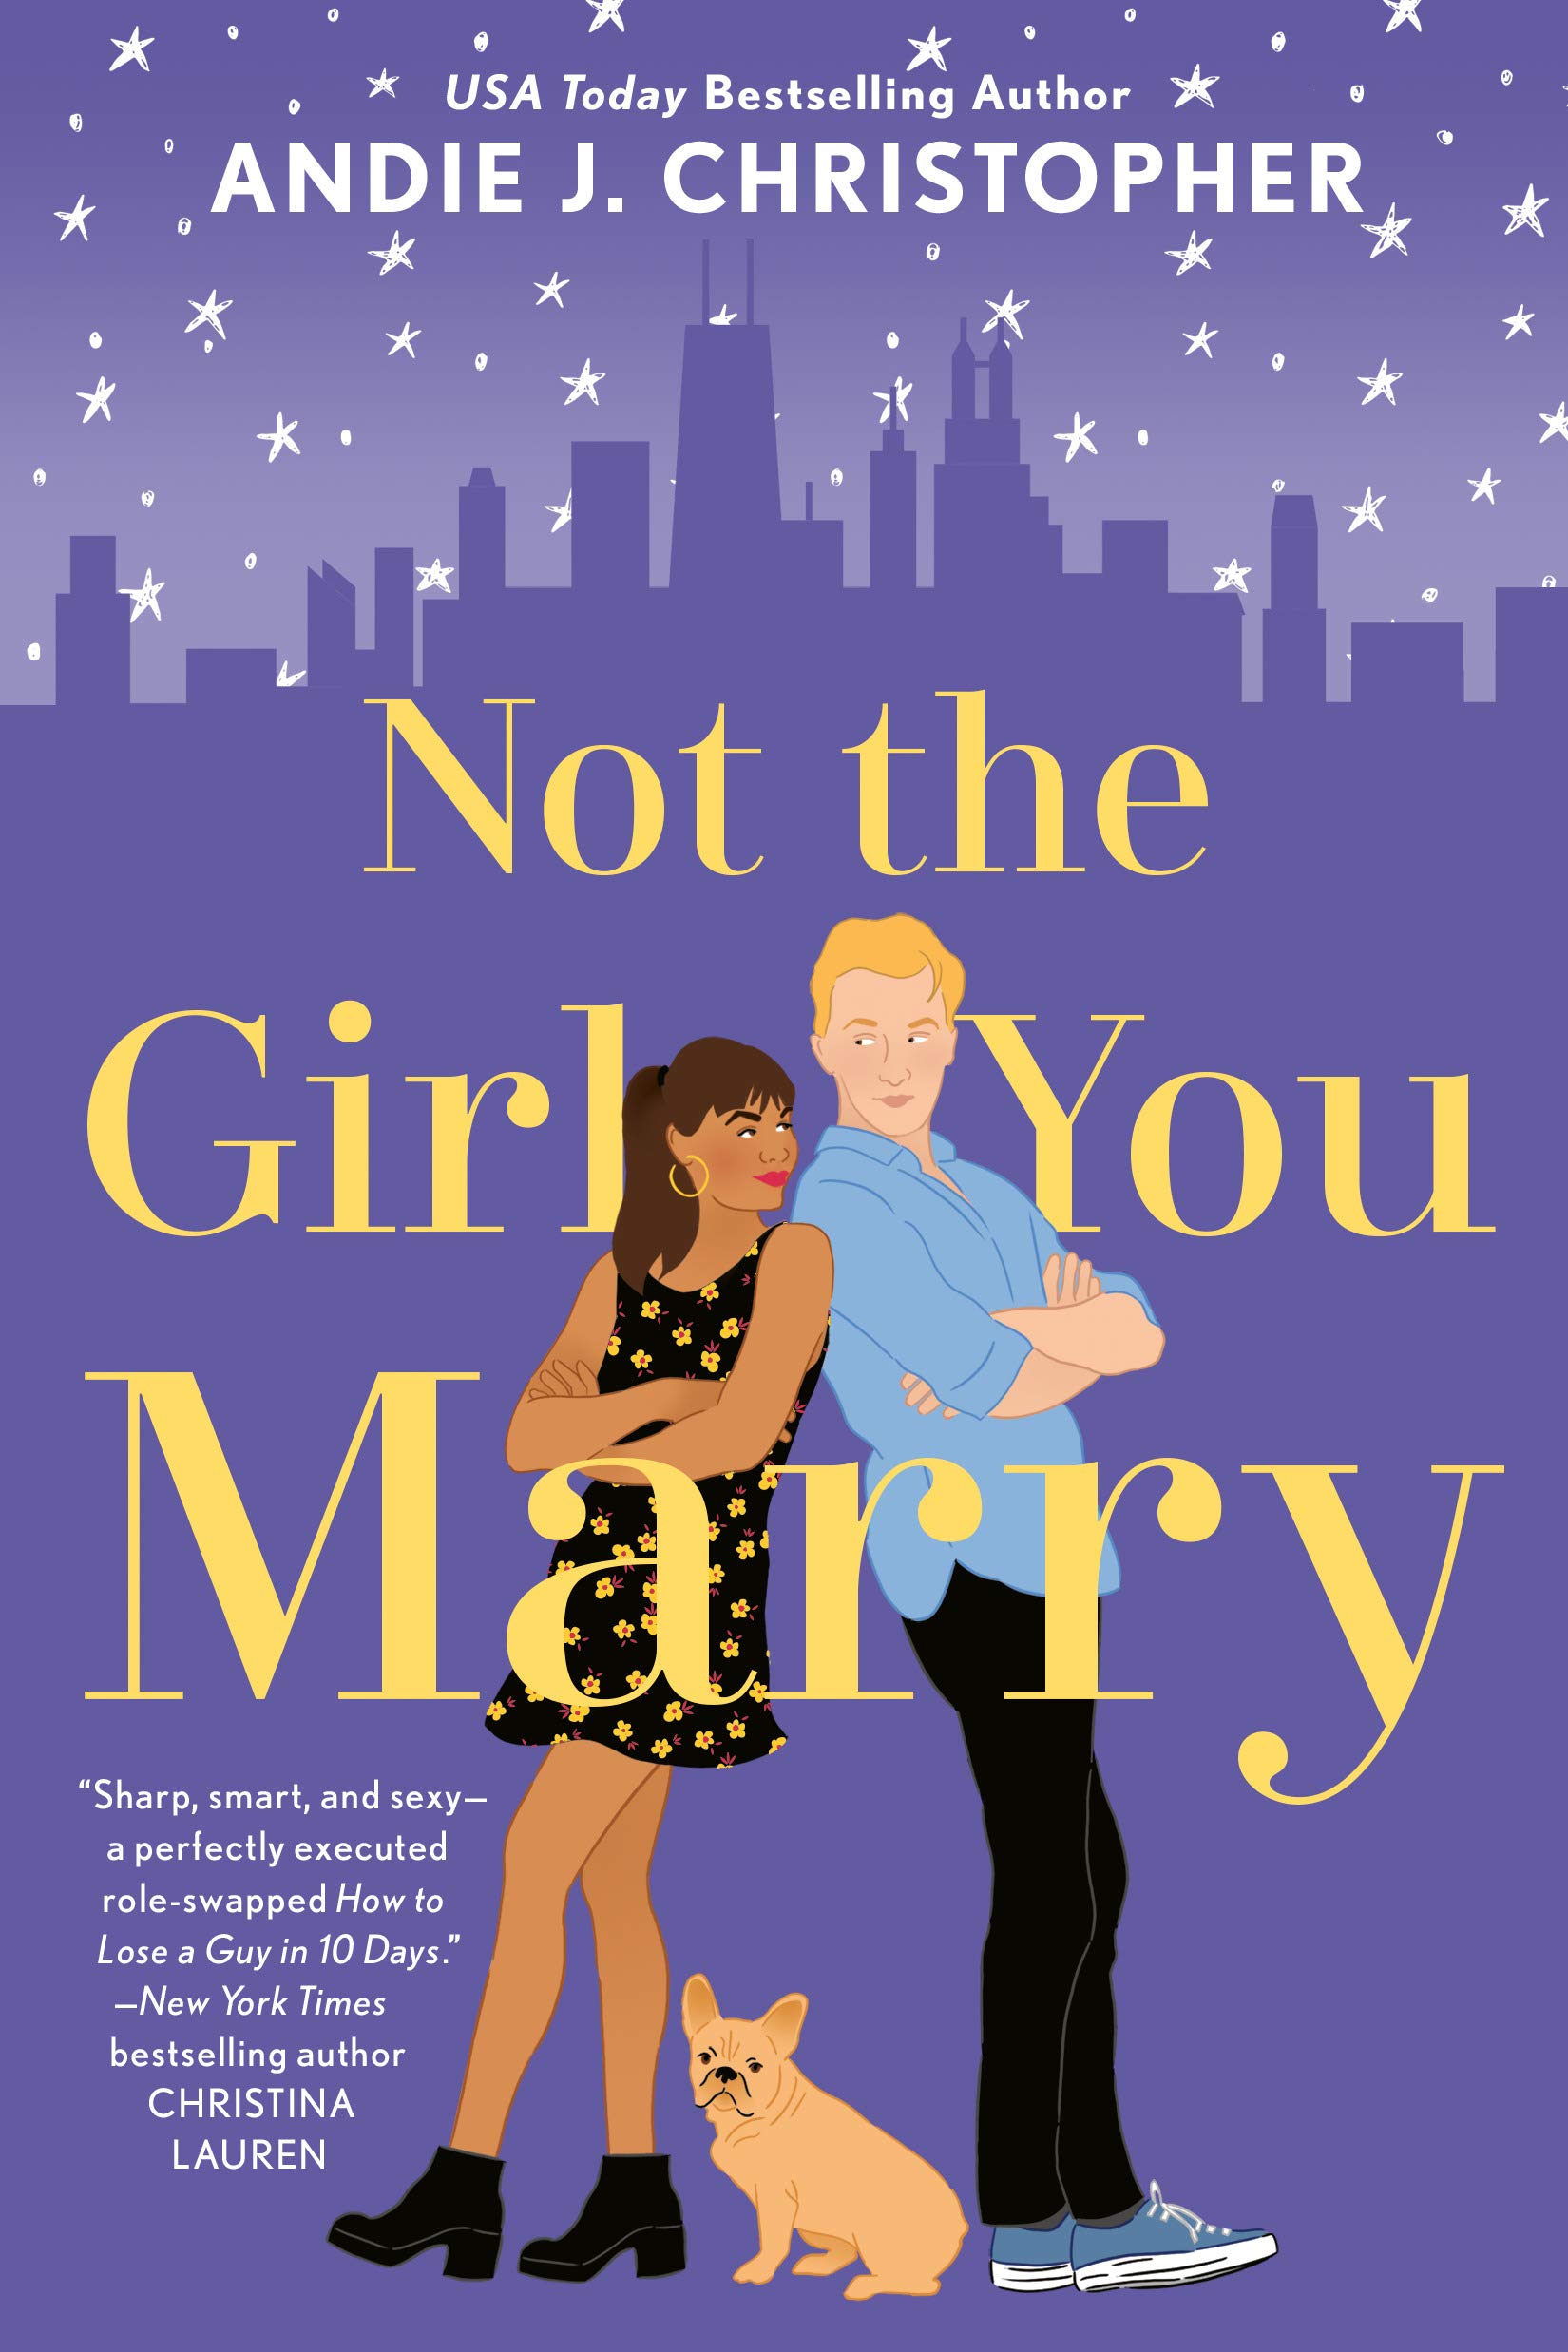 Book Review: “Not The Girl You Marry” by Andie J. Christopher